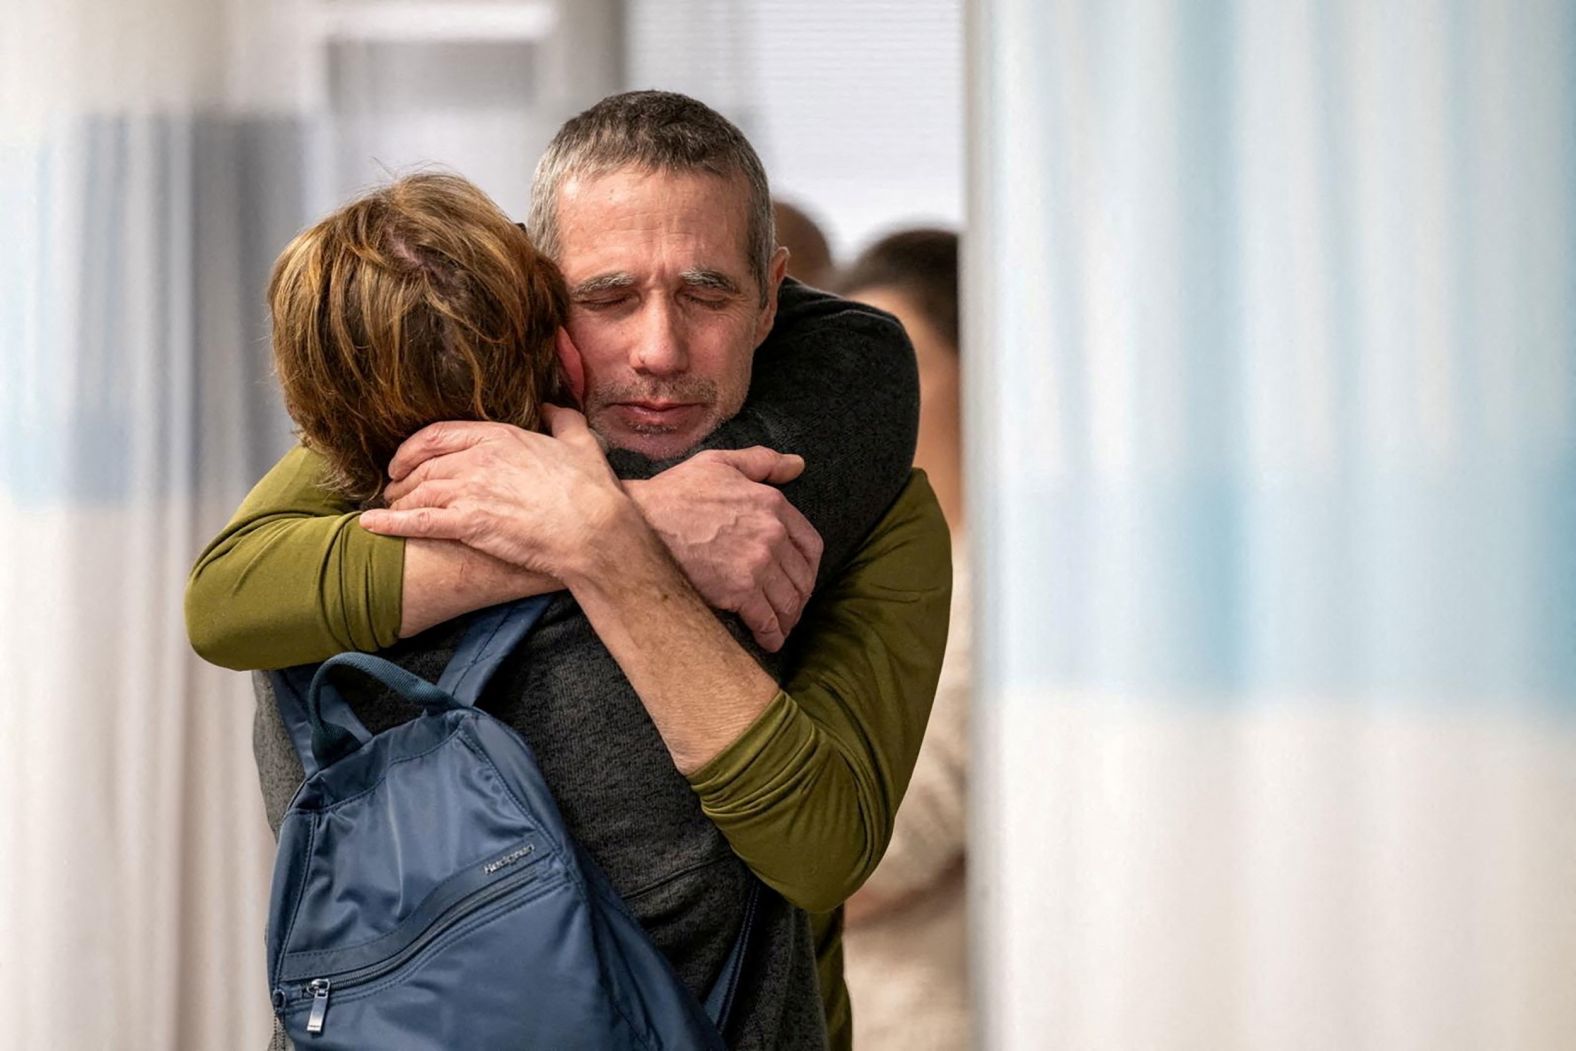 Fernando Simon Marman hugs a loved one in Ramat Gan, Israel, on Monday, February 12, after he and another hostage were rescued in an Israeli military raid in Rafah, Gaza. Marman, 60, and Louis Har, 70, were both taken during Hamas' October 7 attack on Israel. After the rescue, the total number of hostages left in Gaza was 134, according to Israel Defense Forces spokesperson Daniel Hagari.